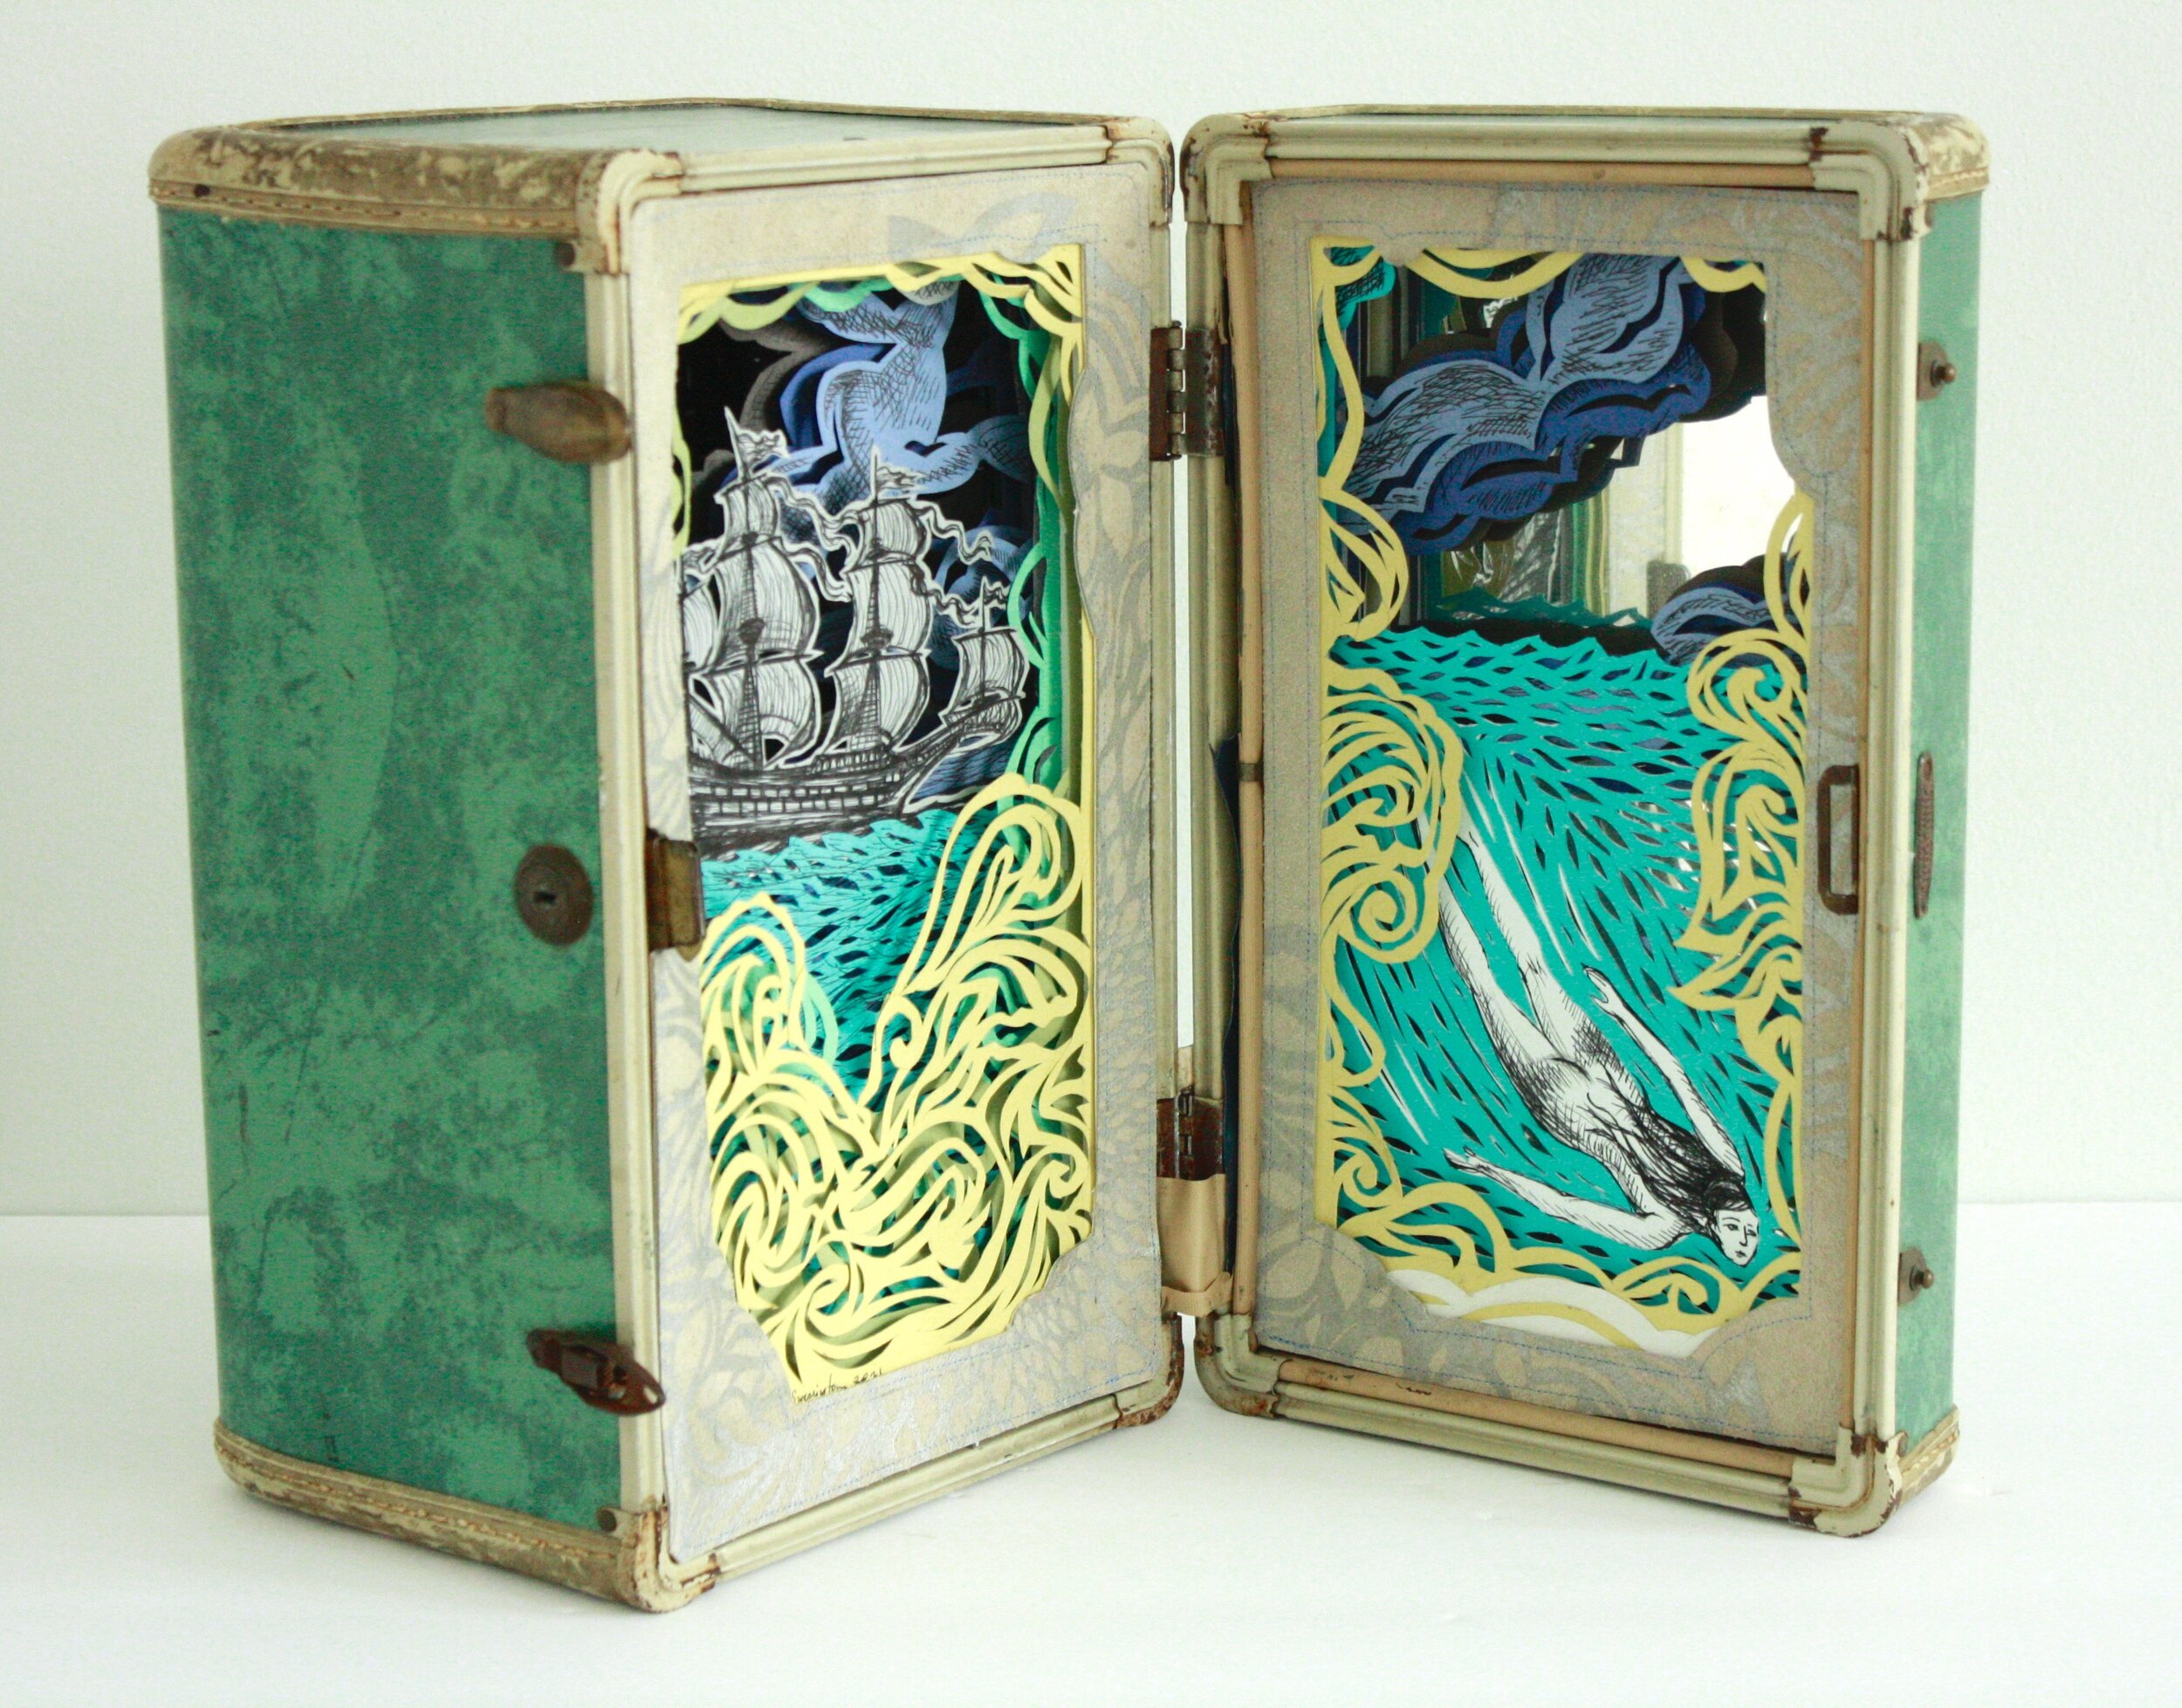 "Overboard," tunnel book in vintage suitcase, 14"h x 16"w x 6"d, 2021